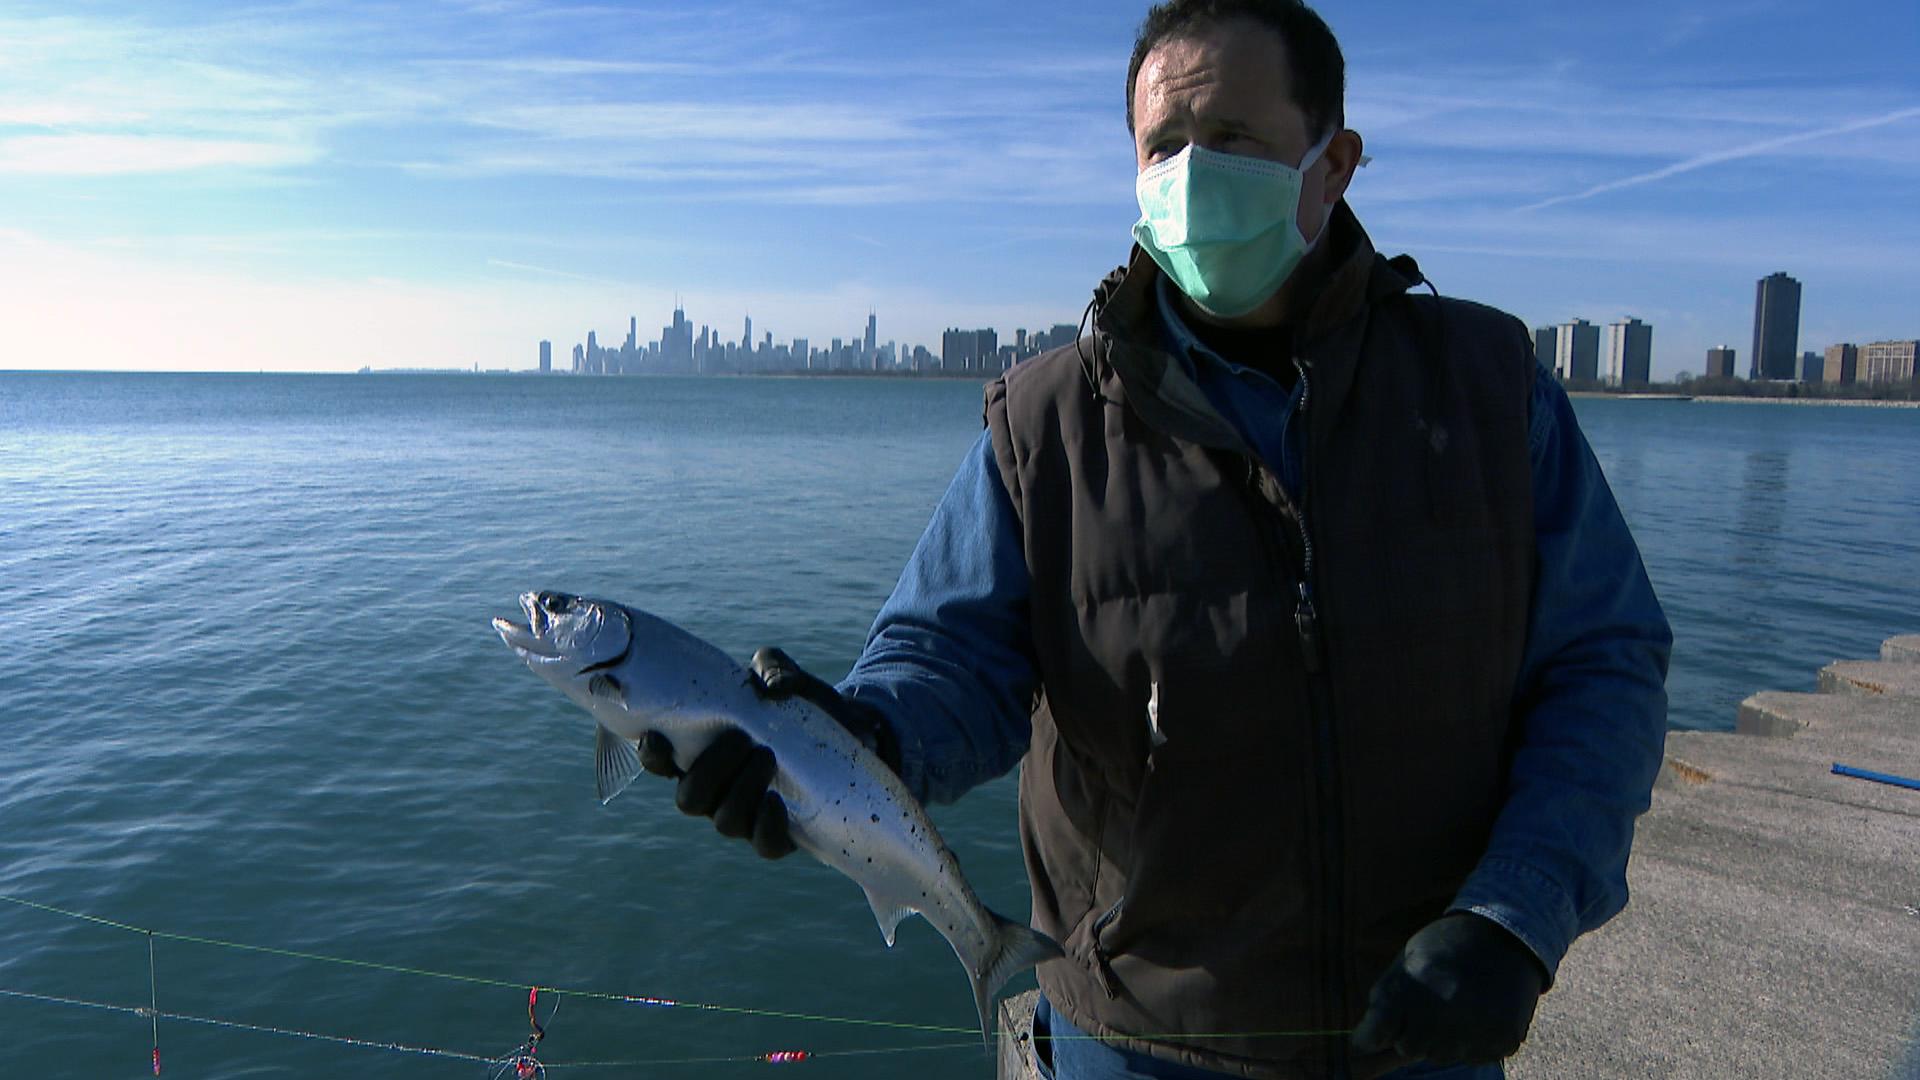 Fishing with a Fire Extinguisher? We Check Out Powerlining in Chicago, Chicago News